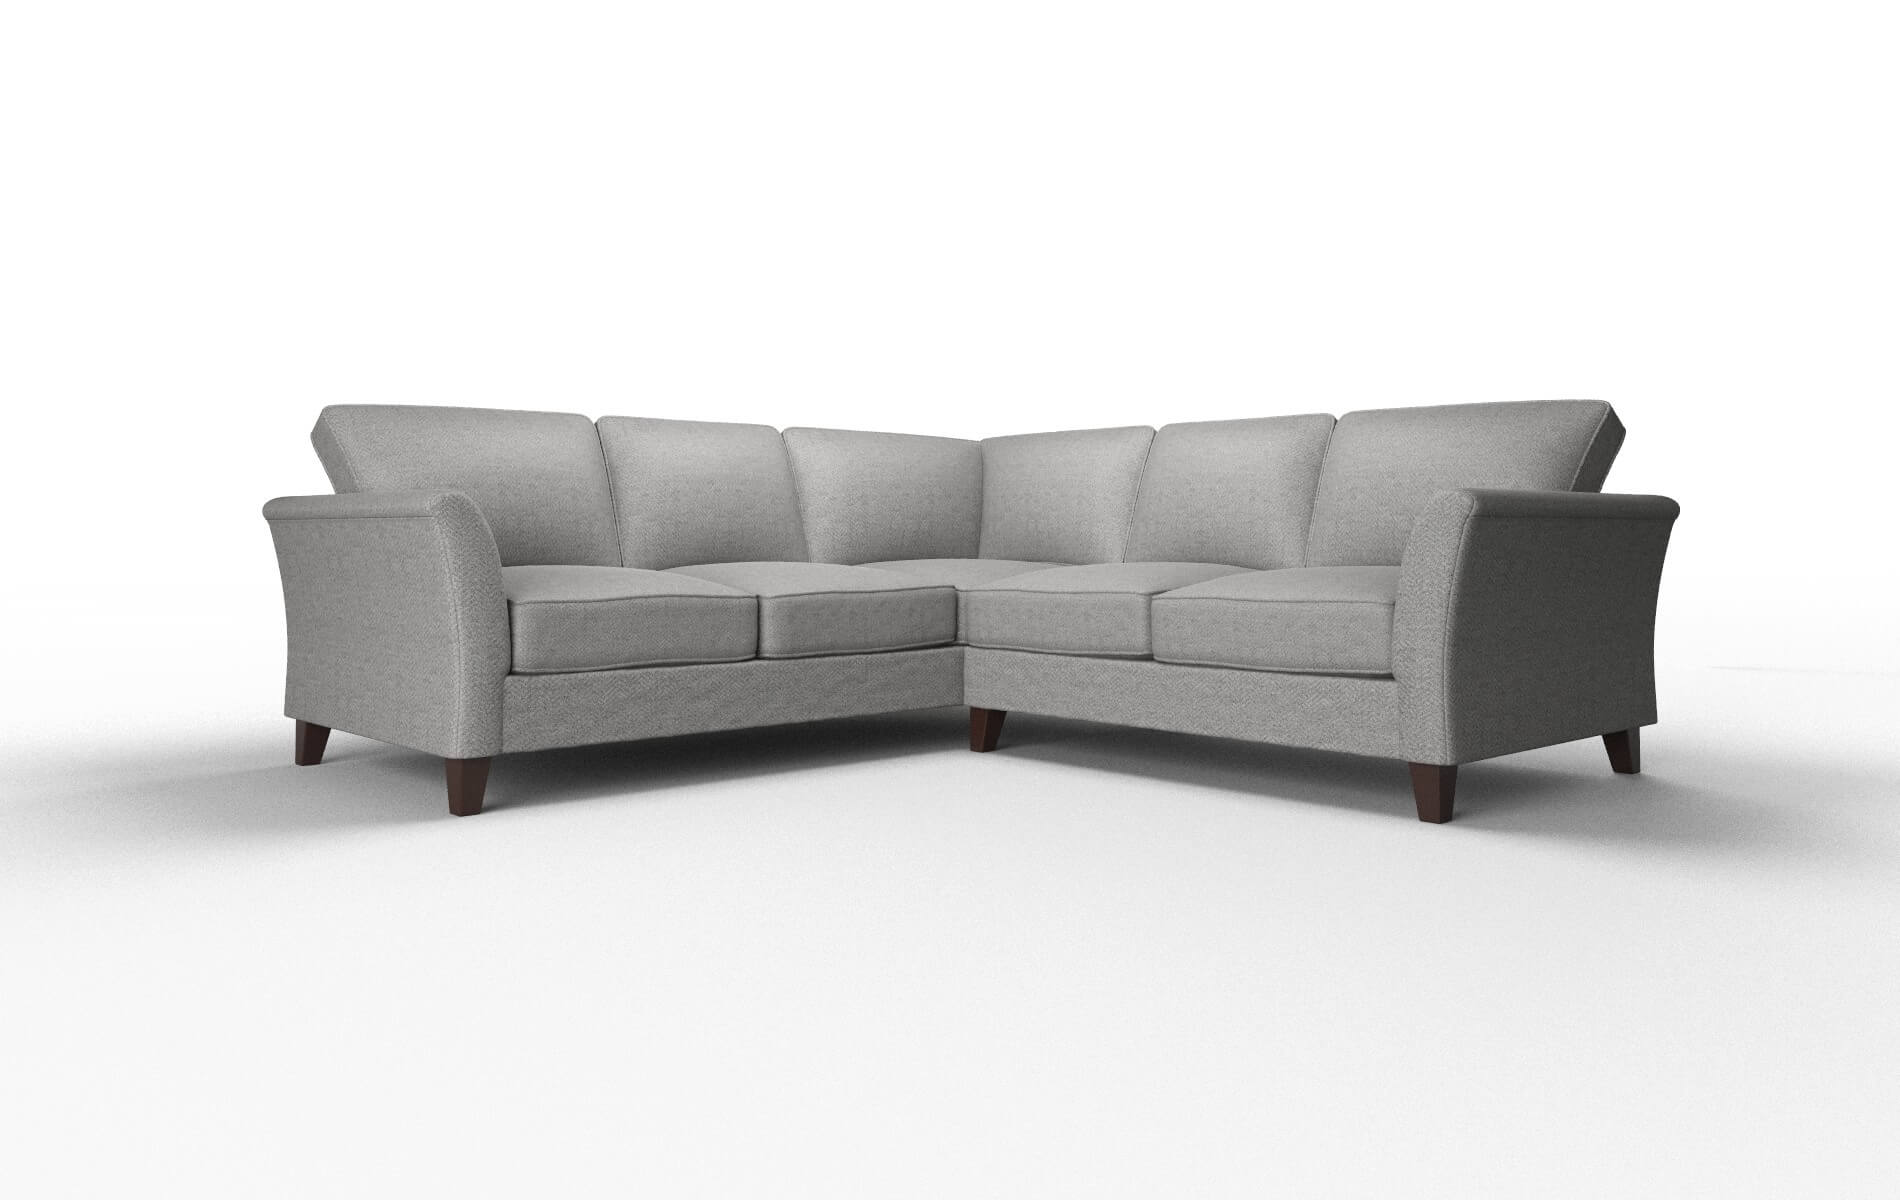 Cologne Catalina Steel Sectional espresso legs